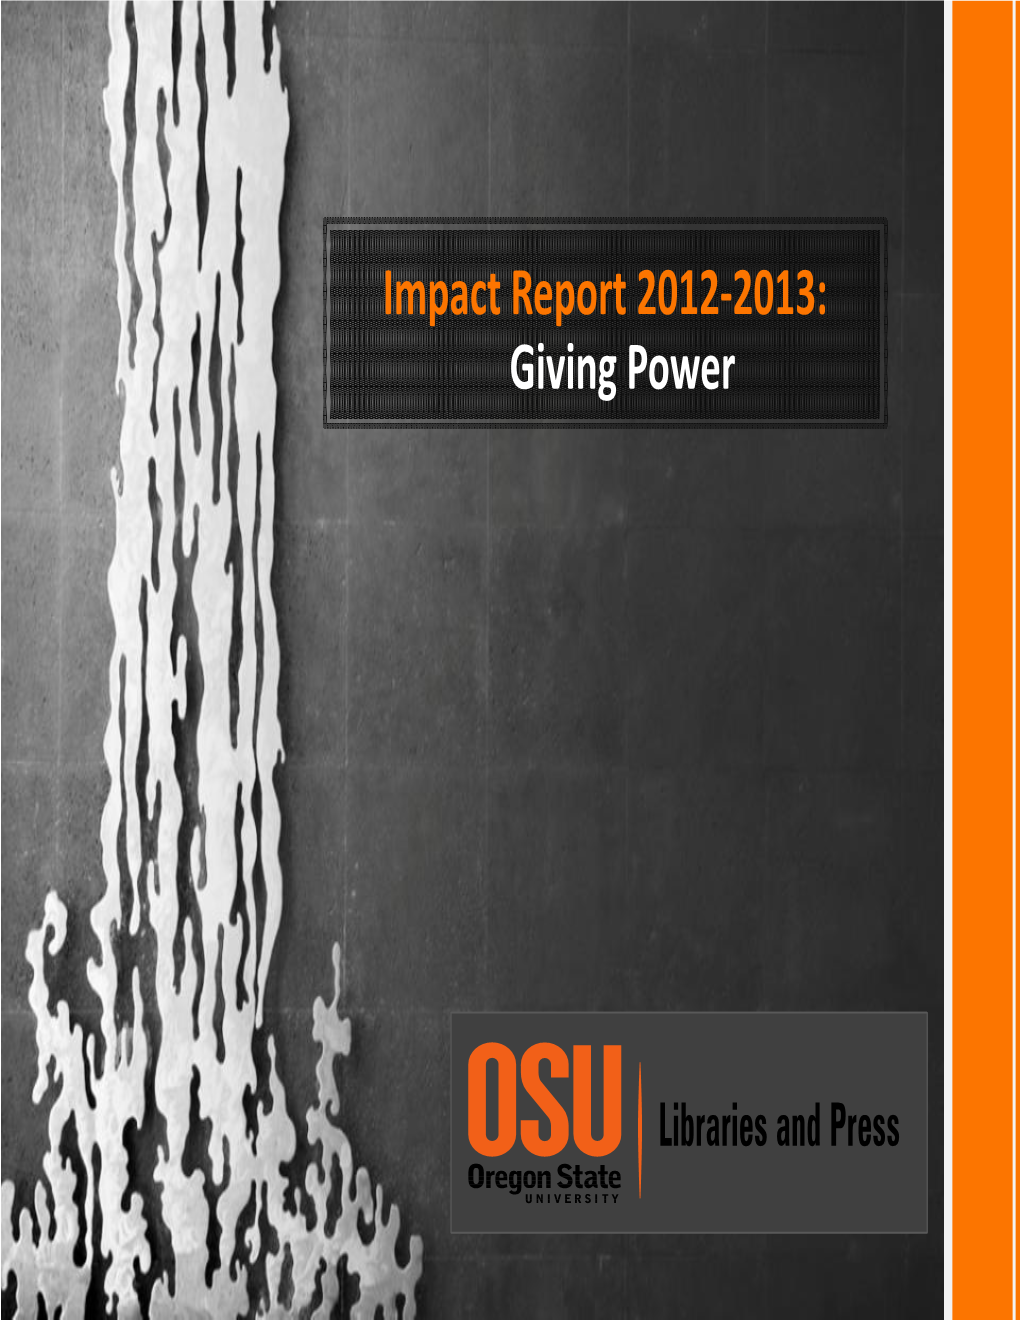 Impact Report 2012-2013: Giving Power